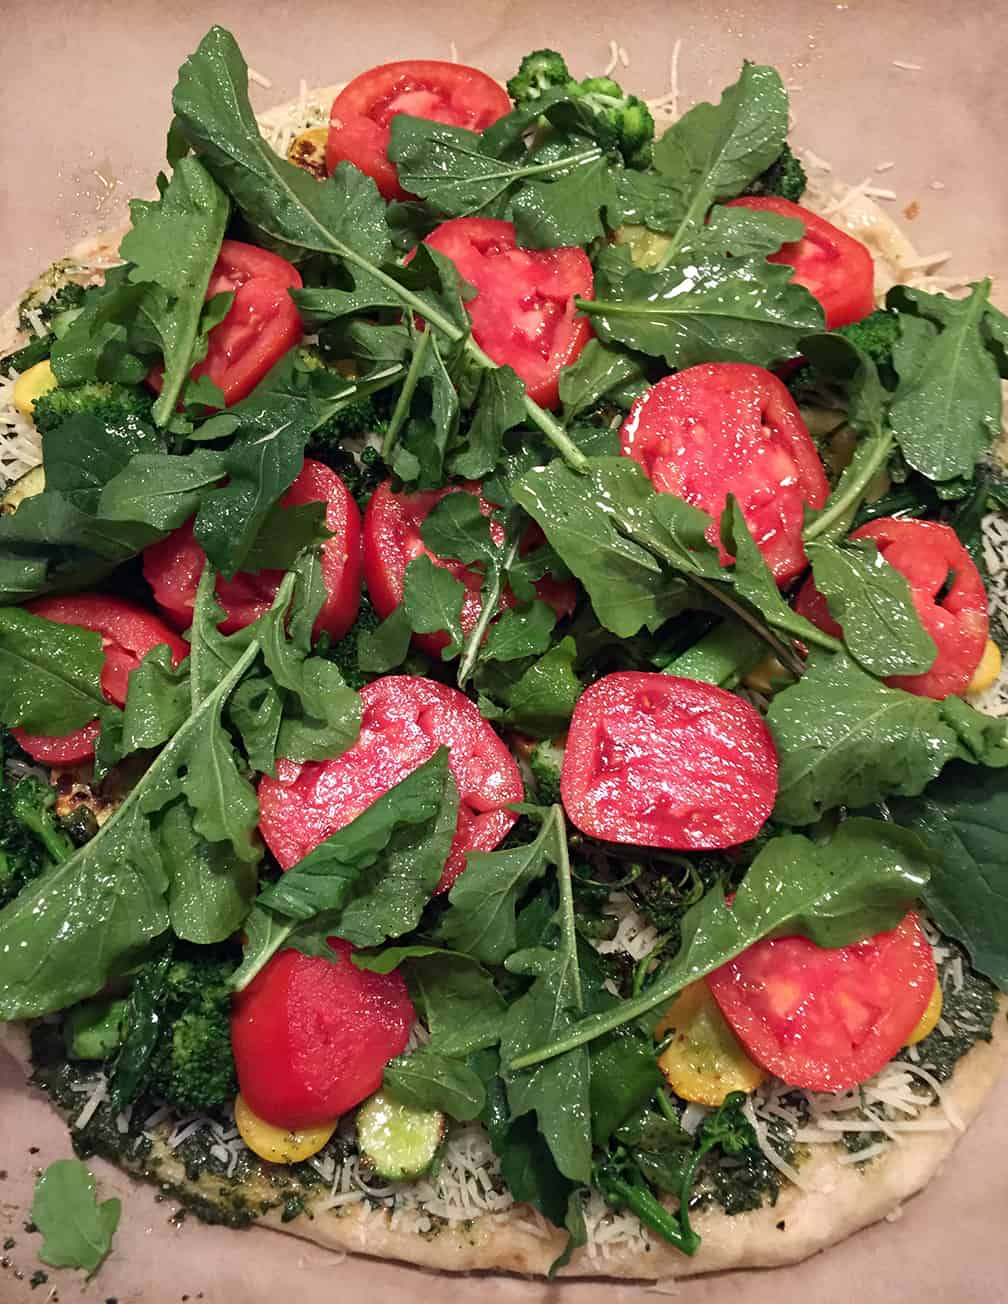 Next, I added the sliced Howard German tomatoes (so meaty and sweet!) and the arugula. I spritzed it all with a light spray of olive oil and put it in a 350 degree oven.